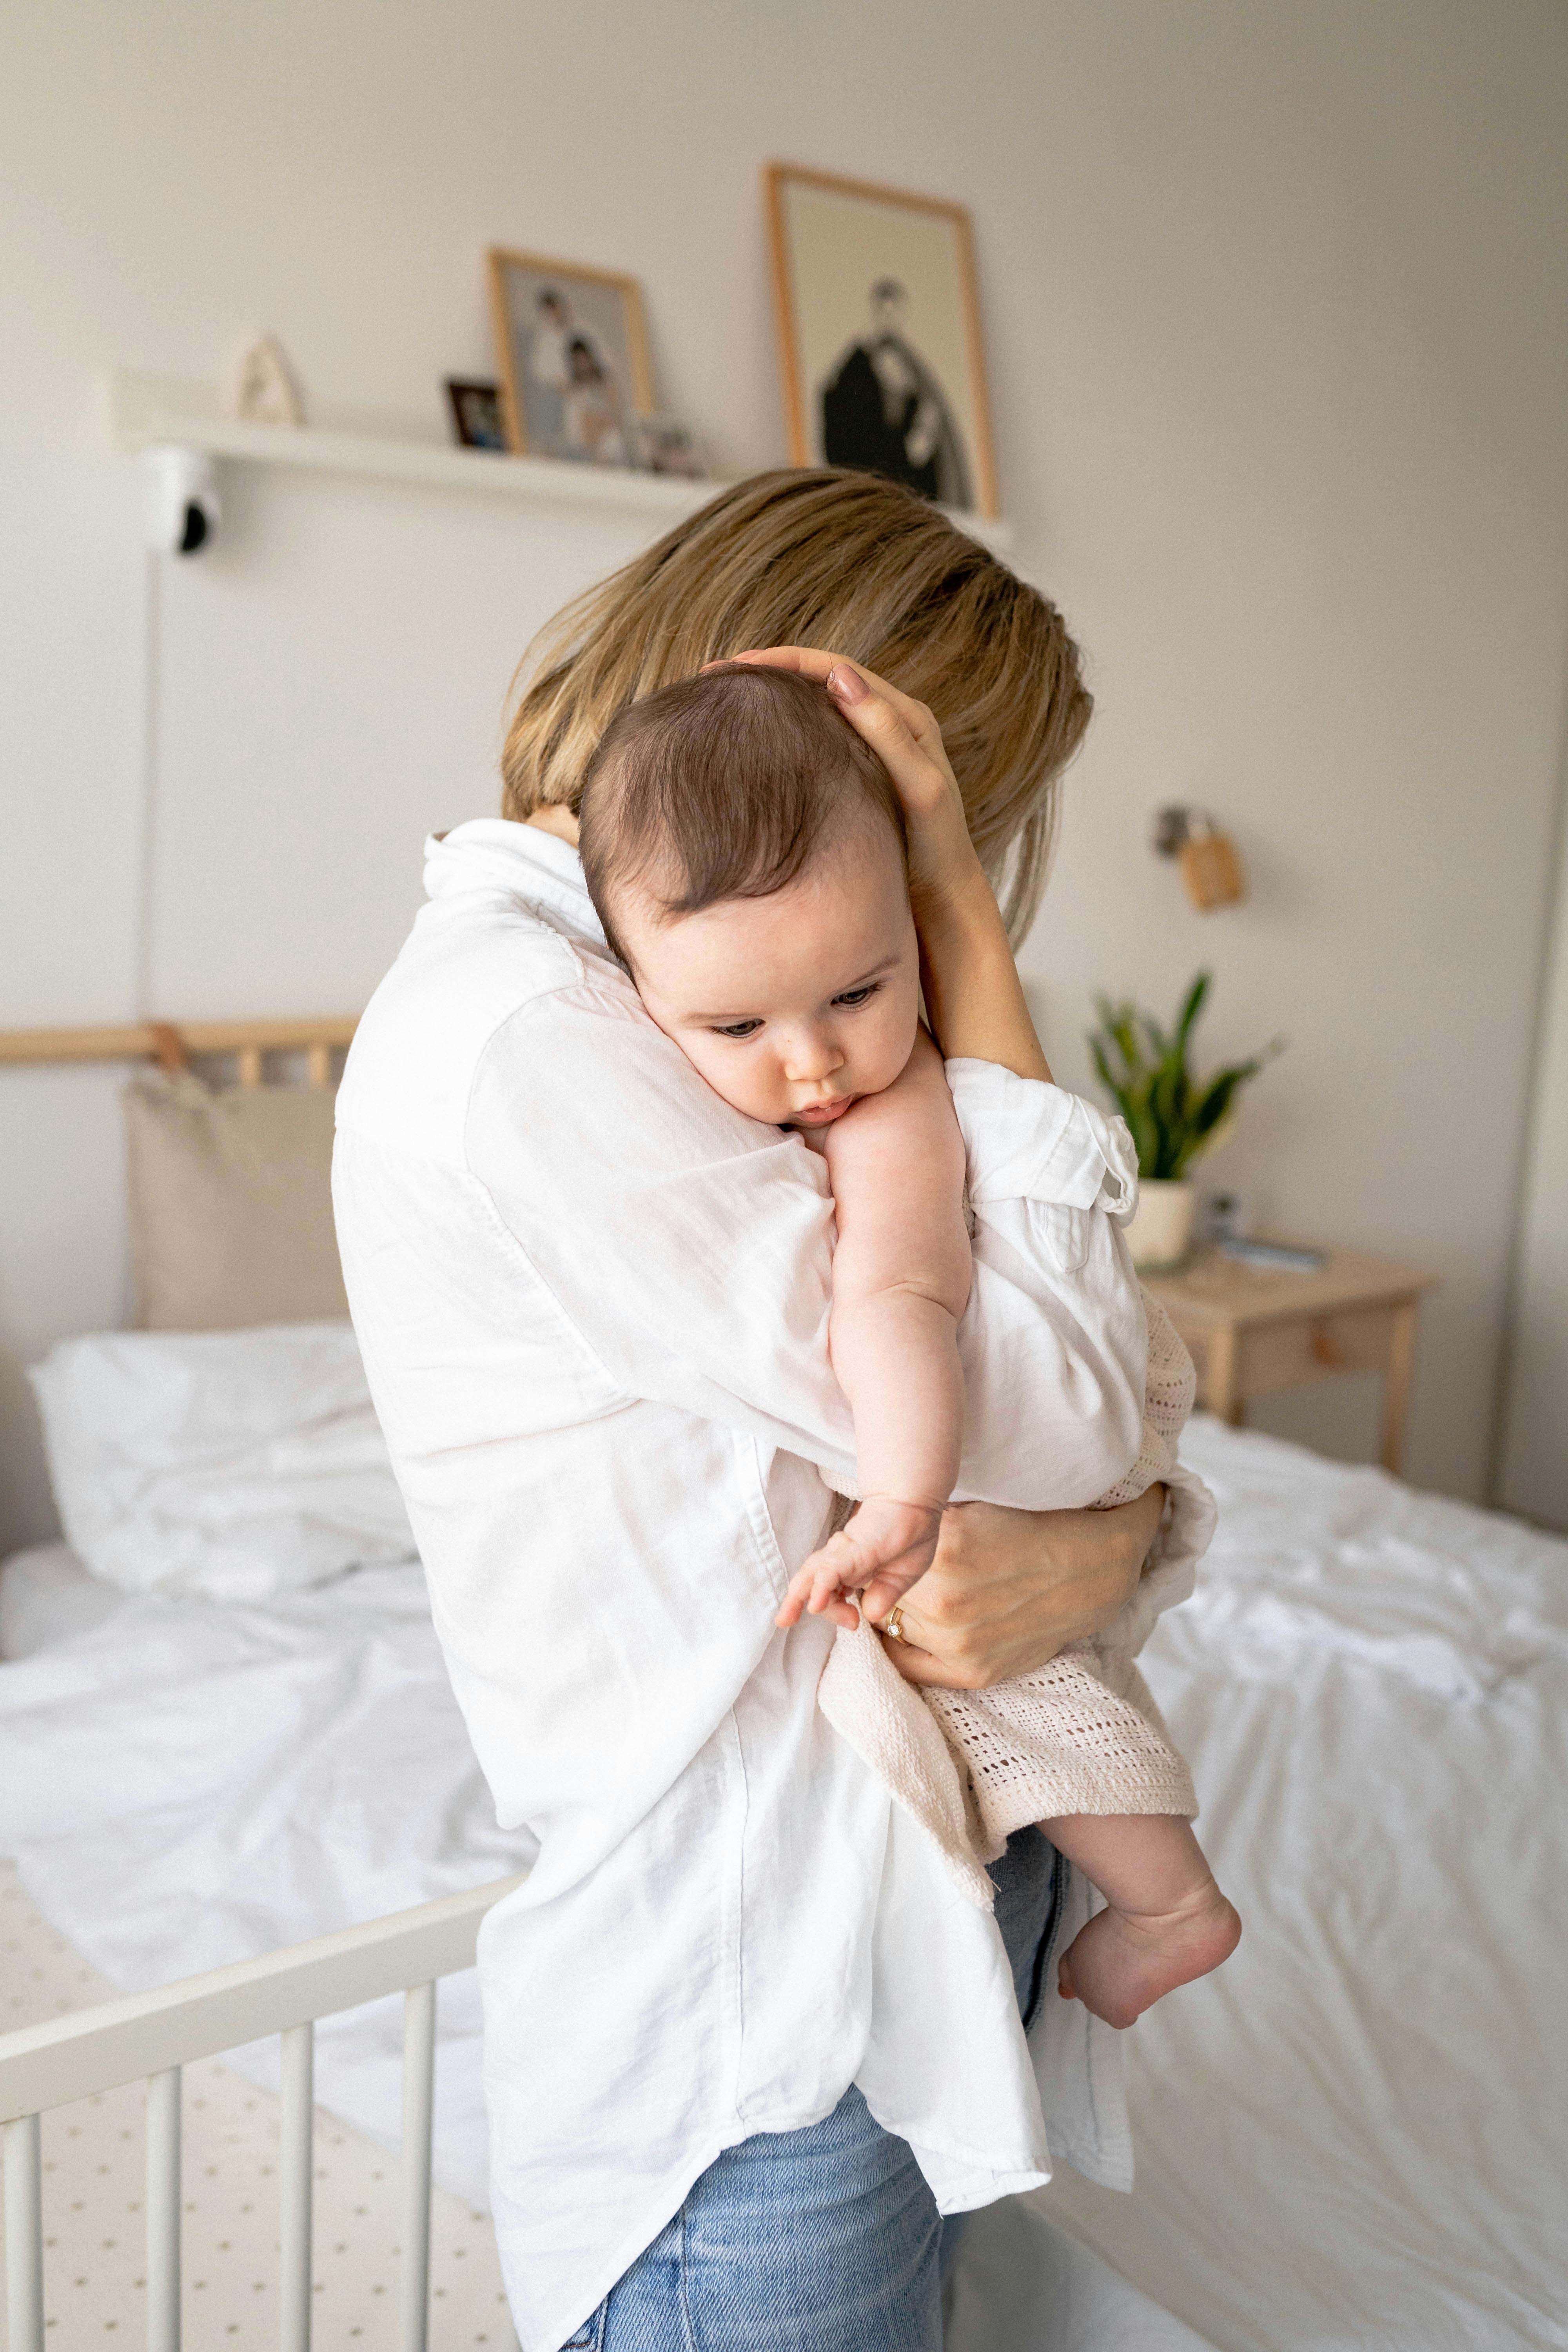 A woman hugging her baby | Source: Pexels